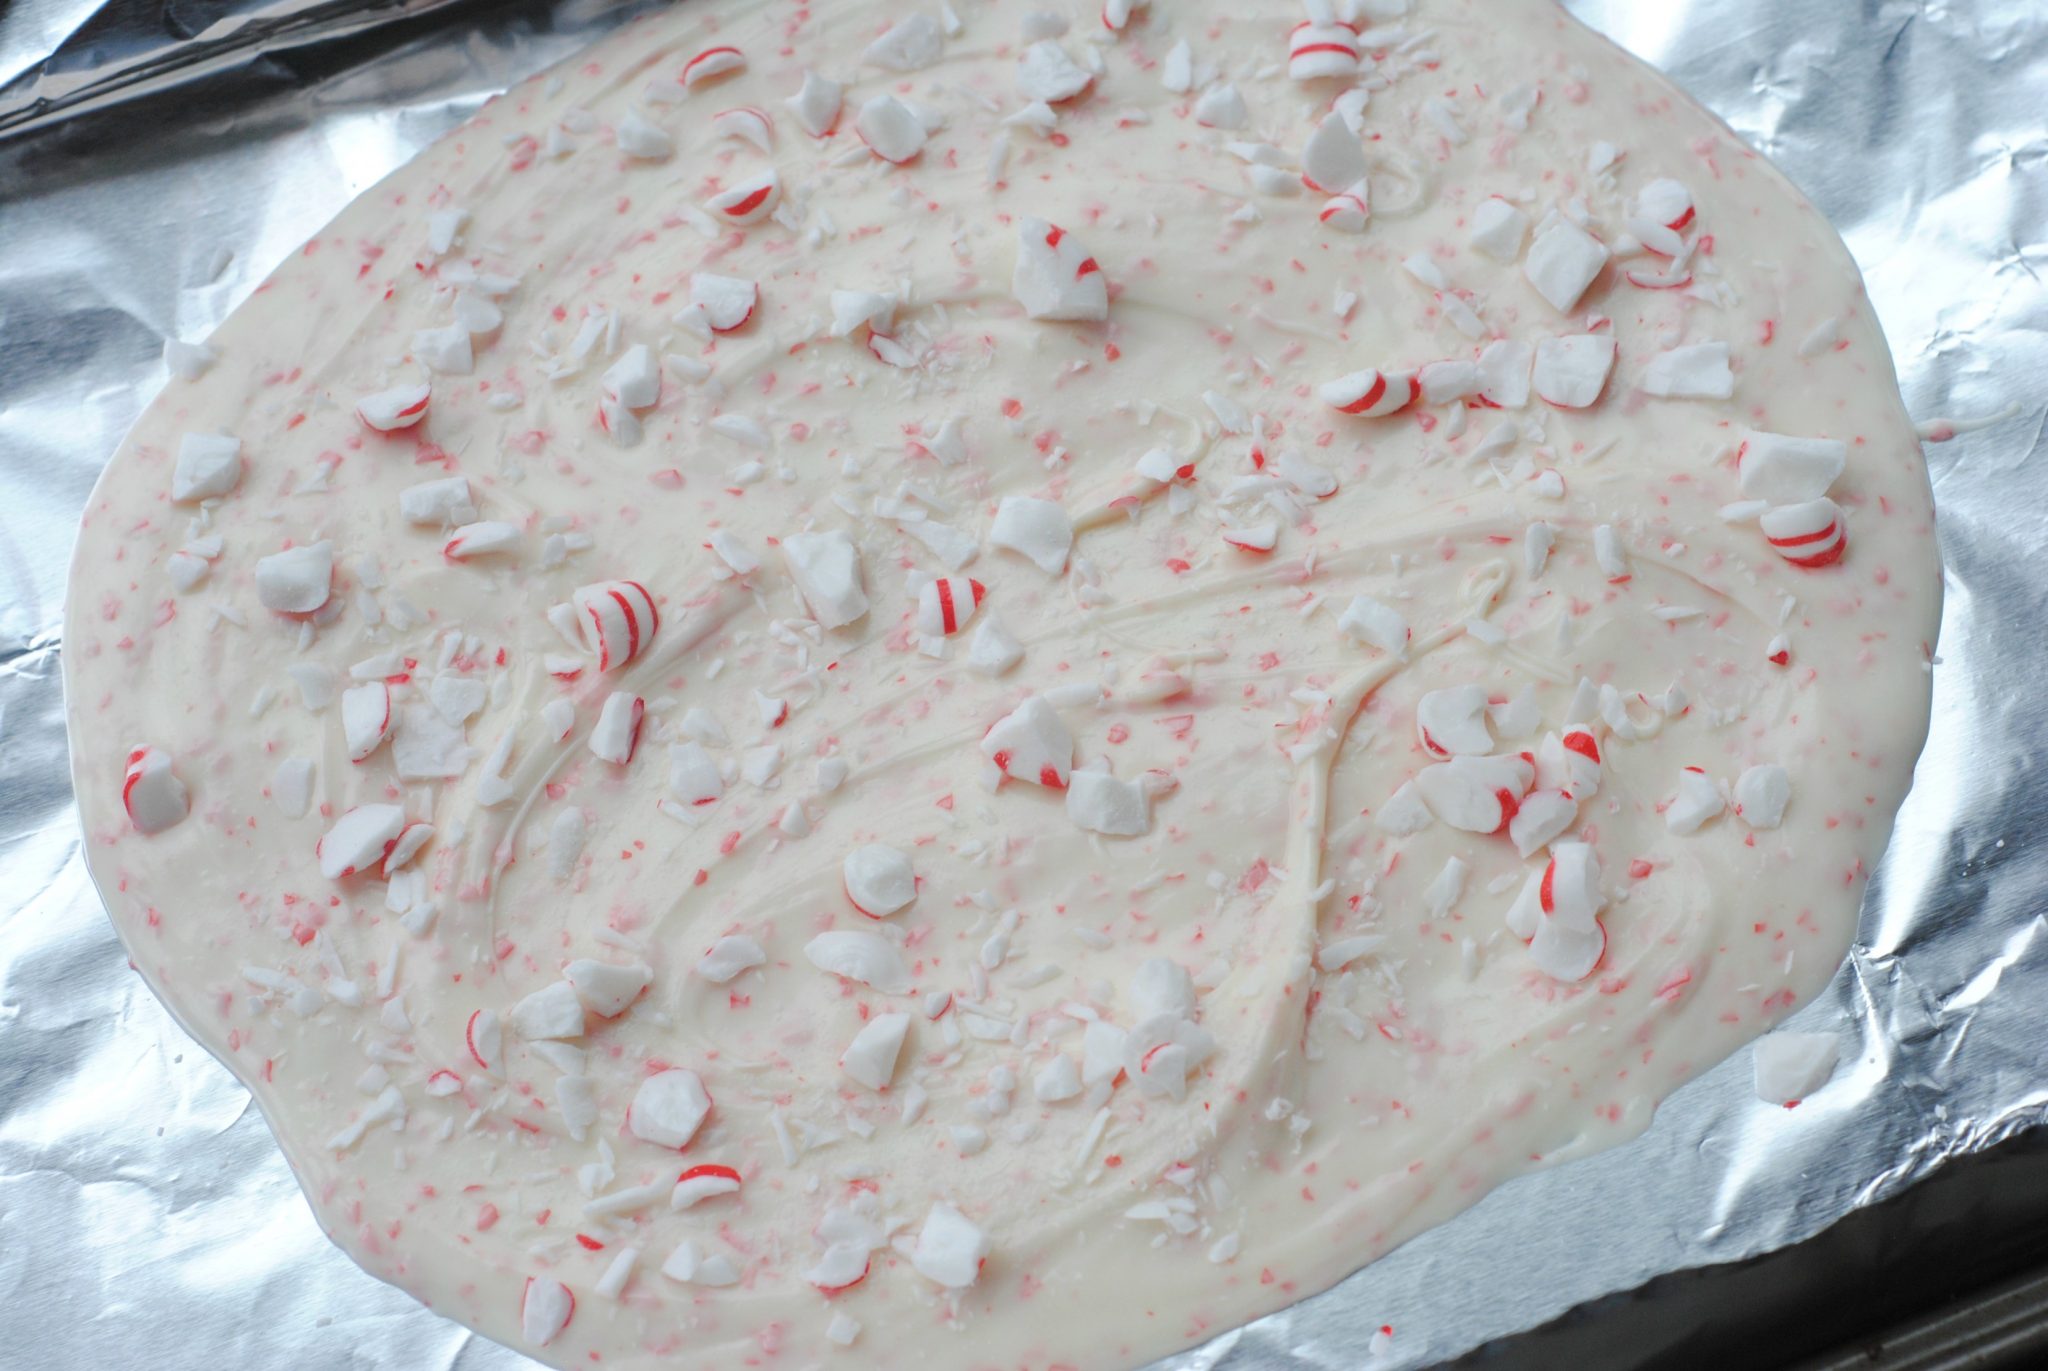 white chocolate and peppermint candies melted on tin foil